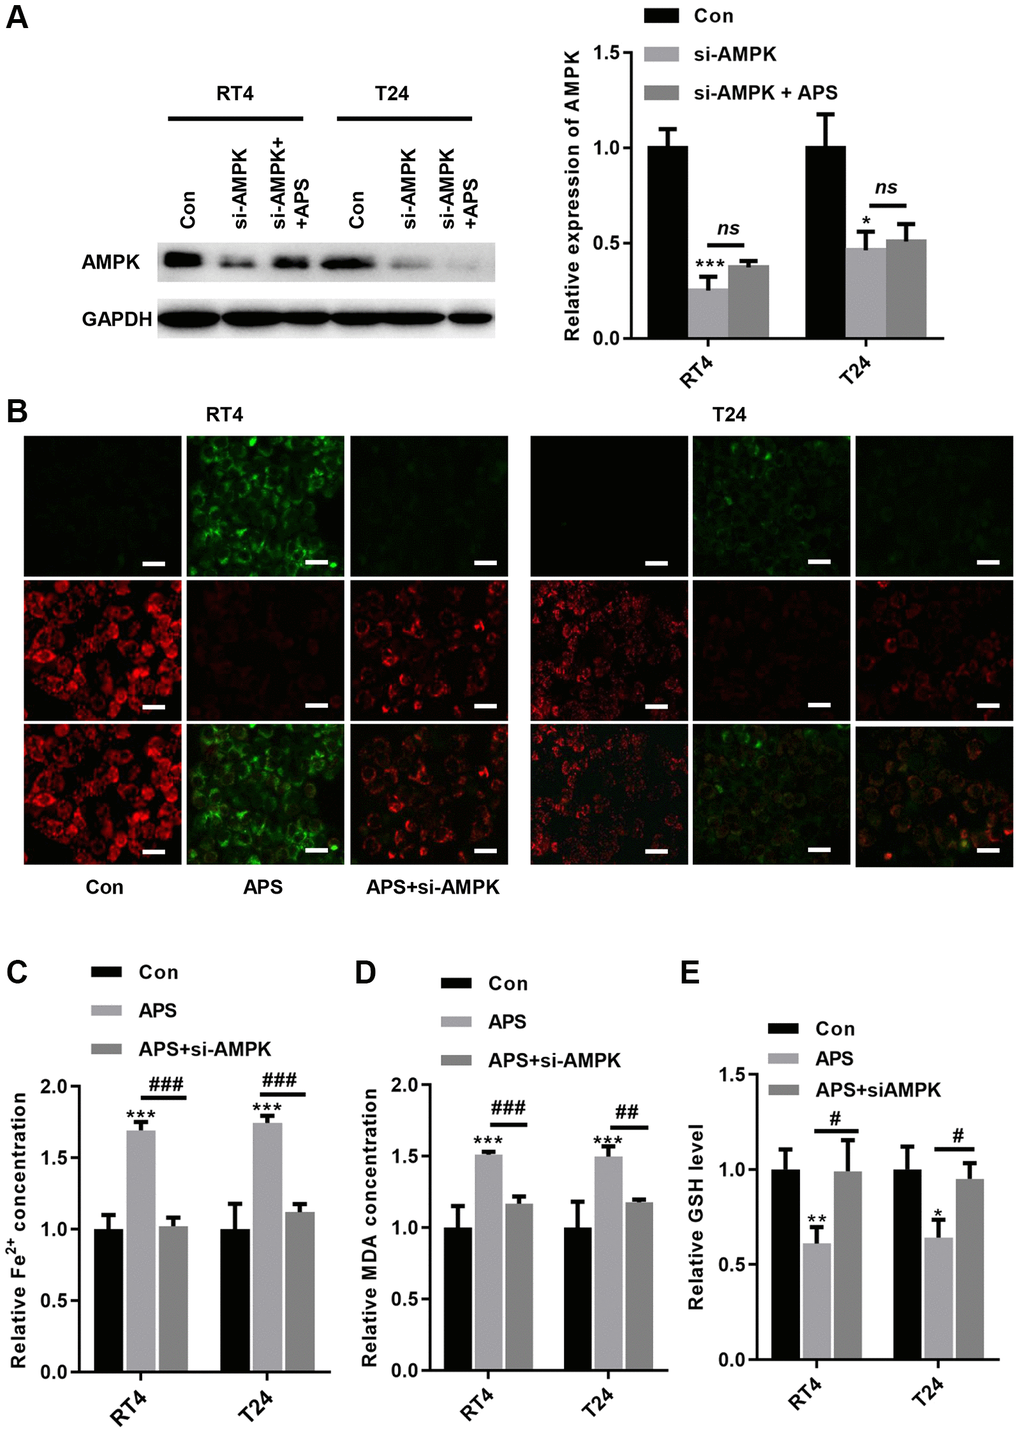 Knockdown of AMPK reverses APS-induced ferroptosis. (A) The Western blot results showed that the transfection of si-AMPK significantly inhibited AMPK expression even in APS-treated RT4 and T24 cells. (B) the JC-1 results showed that silencing AMPK significantly ameliorated APS-induced upregulation of MMP (Bar represents 20 μm, 20 × magnification). In RT4 and T24 cells, the APS-induced increase in Fe2+ (C) and MDA (D) levels could be alleviated by si-AMPK to some extent. (E) In RT4 and T24 cells, the reduction of GSH induced by APS could be reversed by knockdown of AMPK. *p ***p ##p ###p 